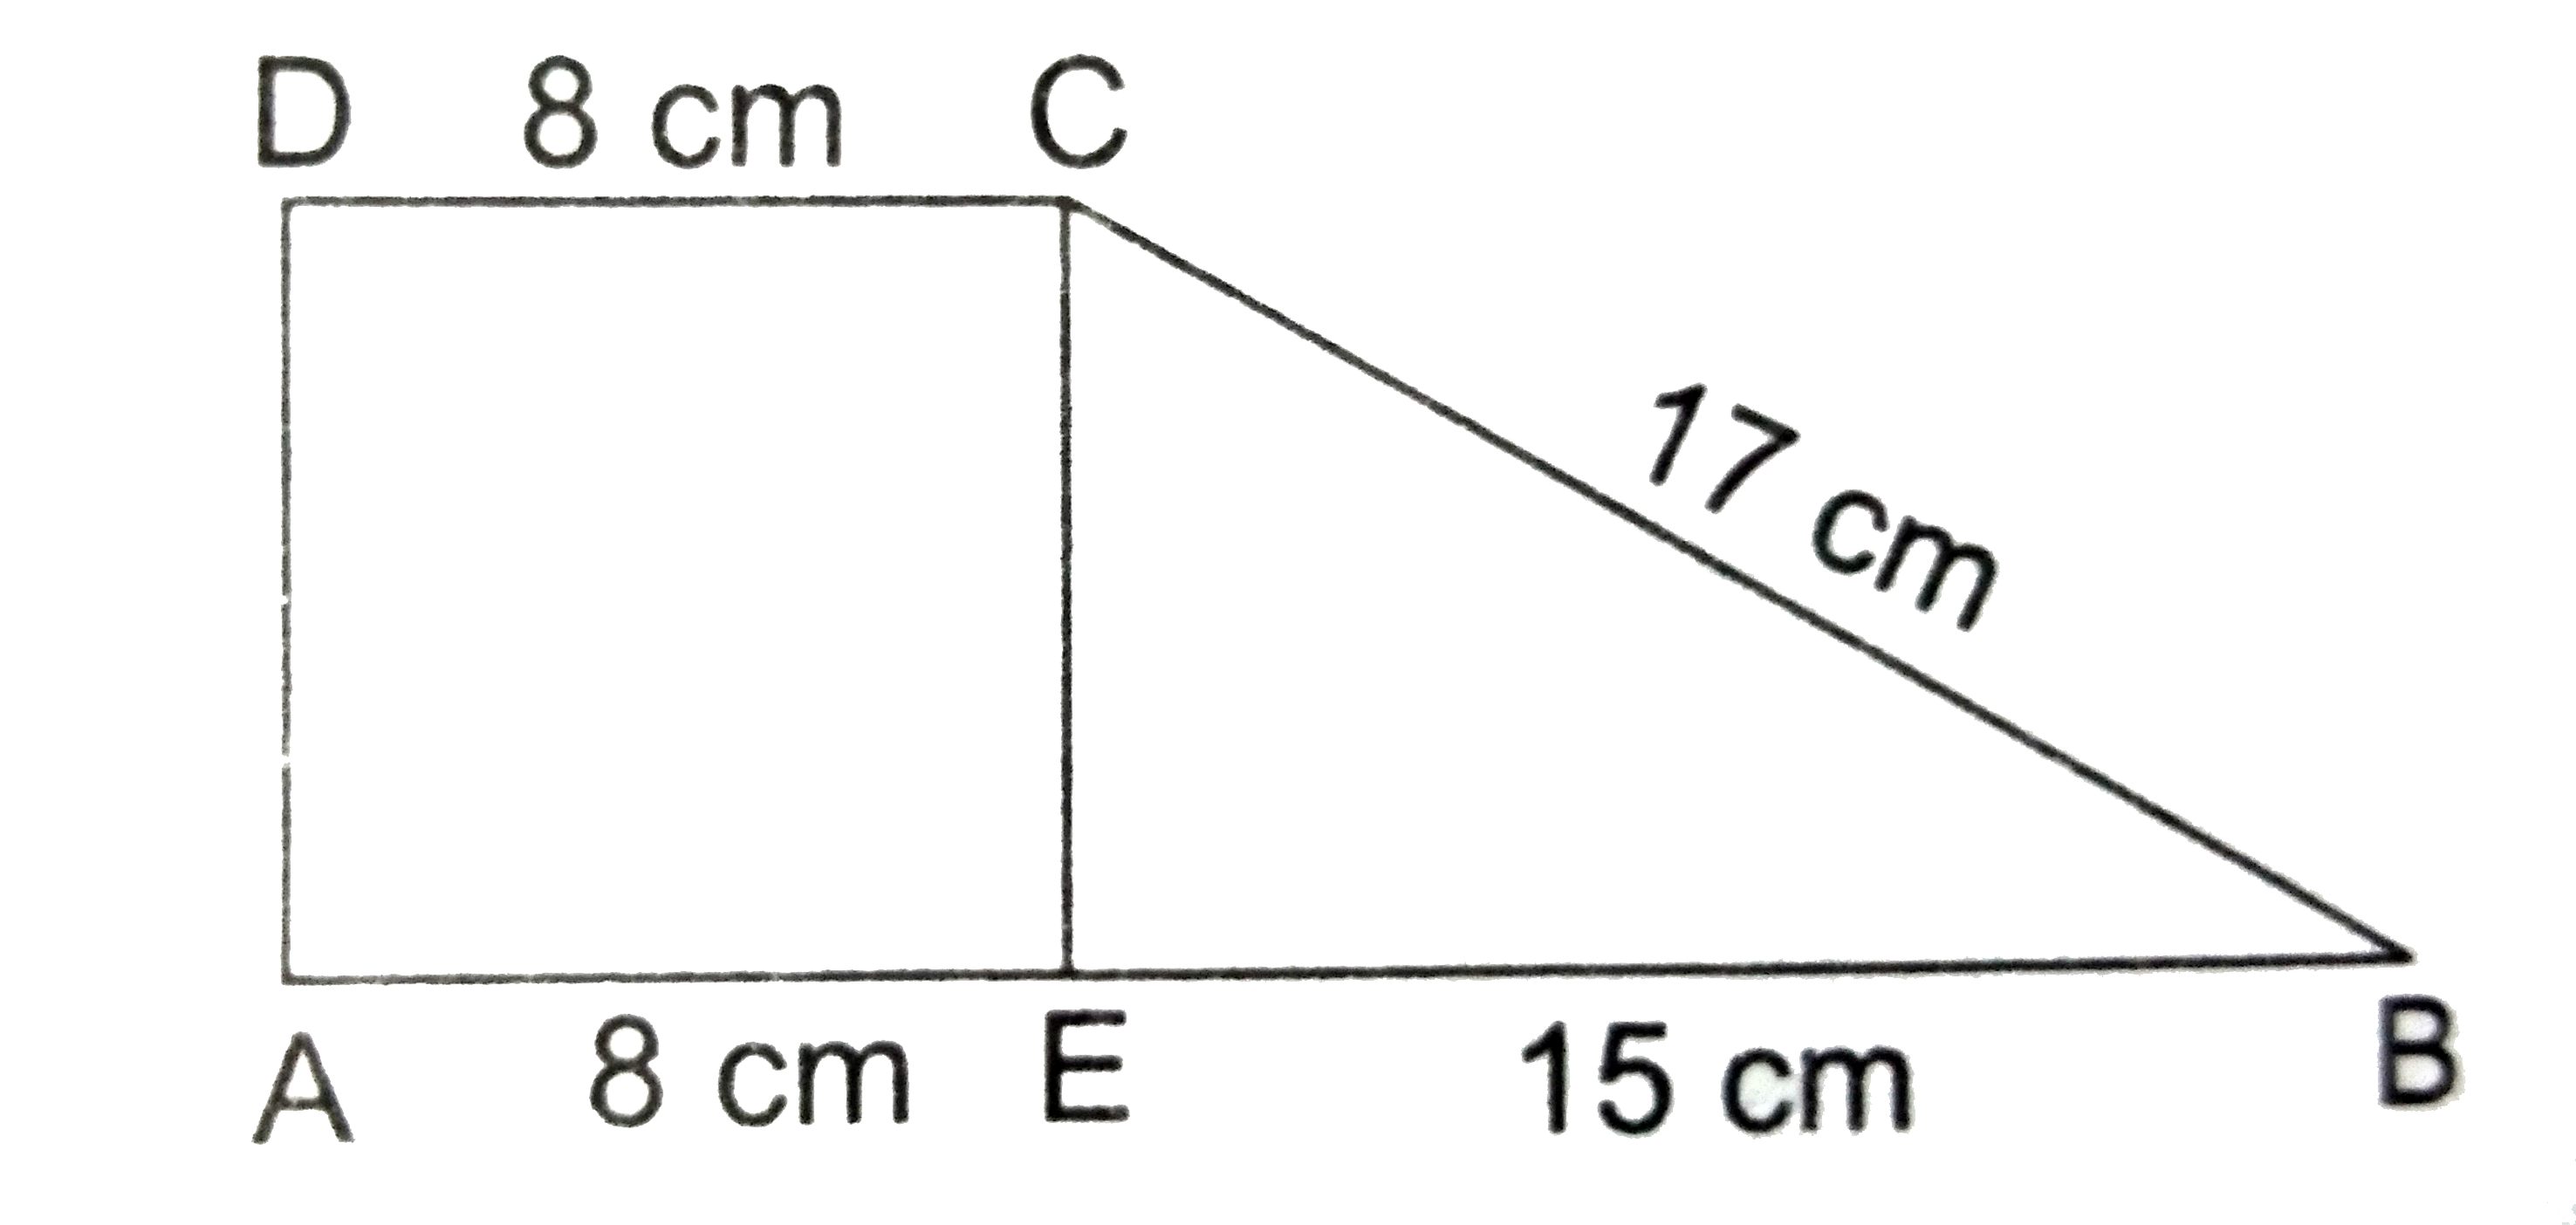 The area of trapezium ABCD in the given  figure is